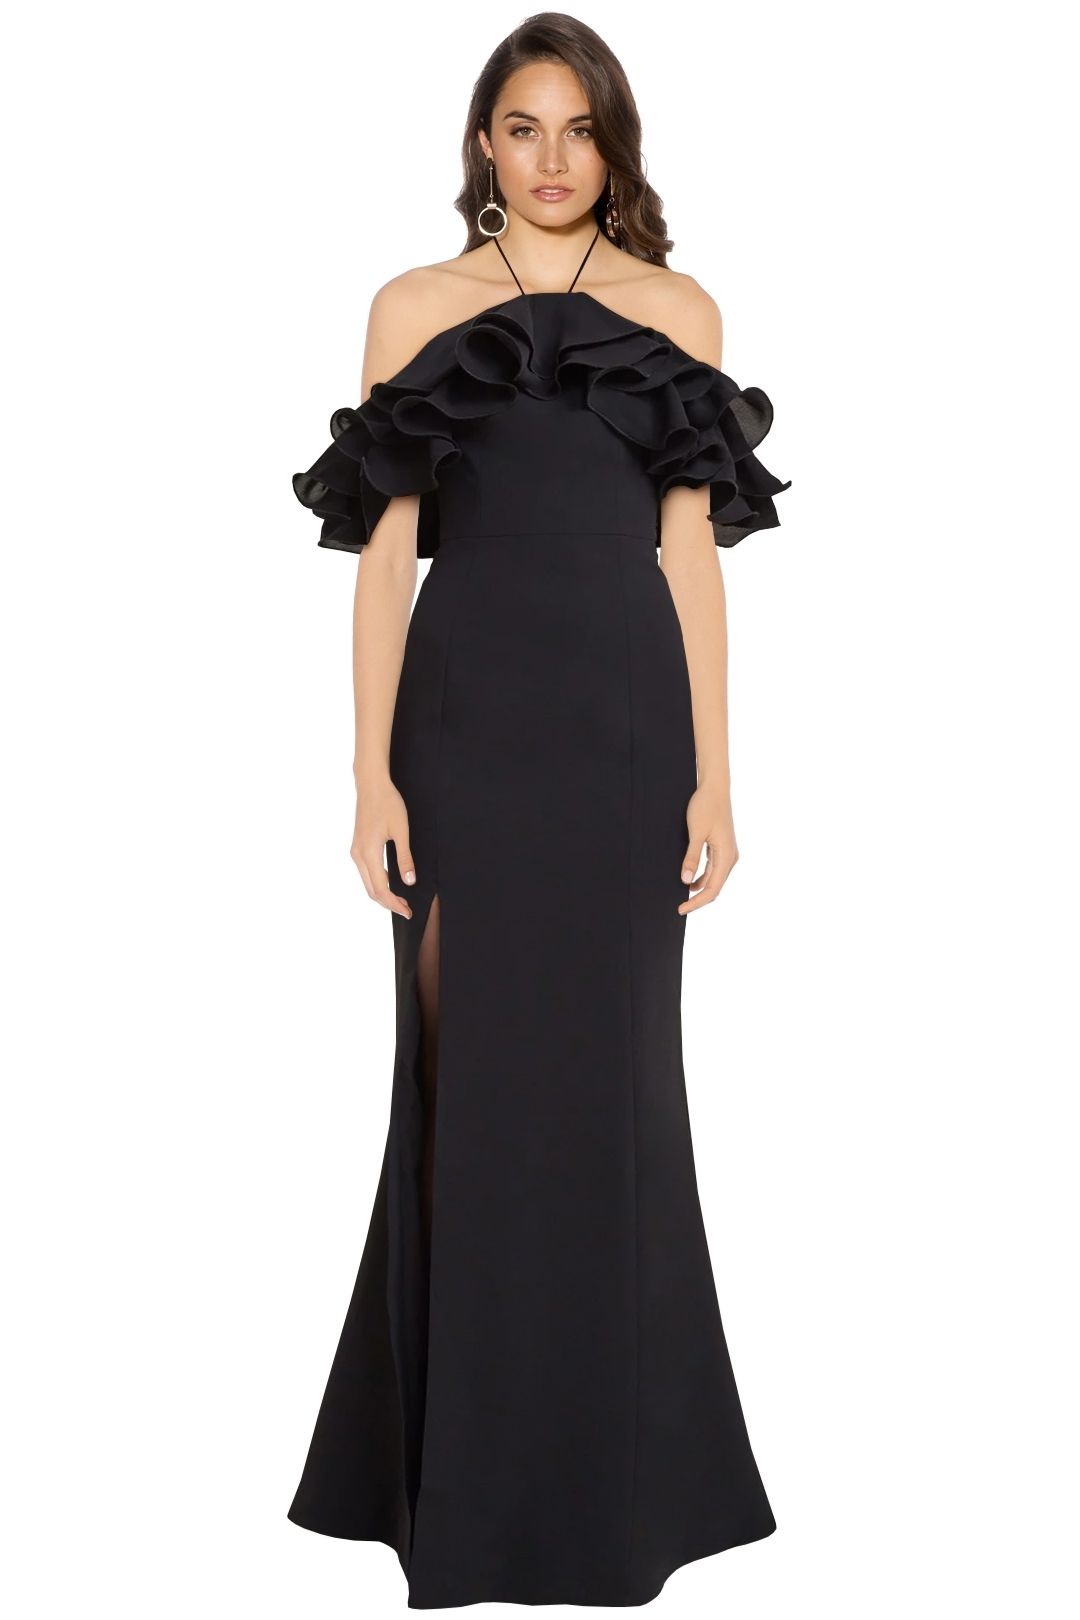 Cameo - Immerse Gown - Black - Front